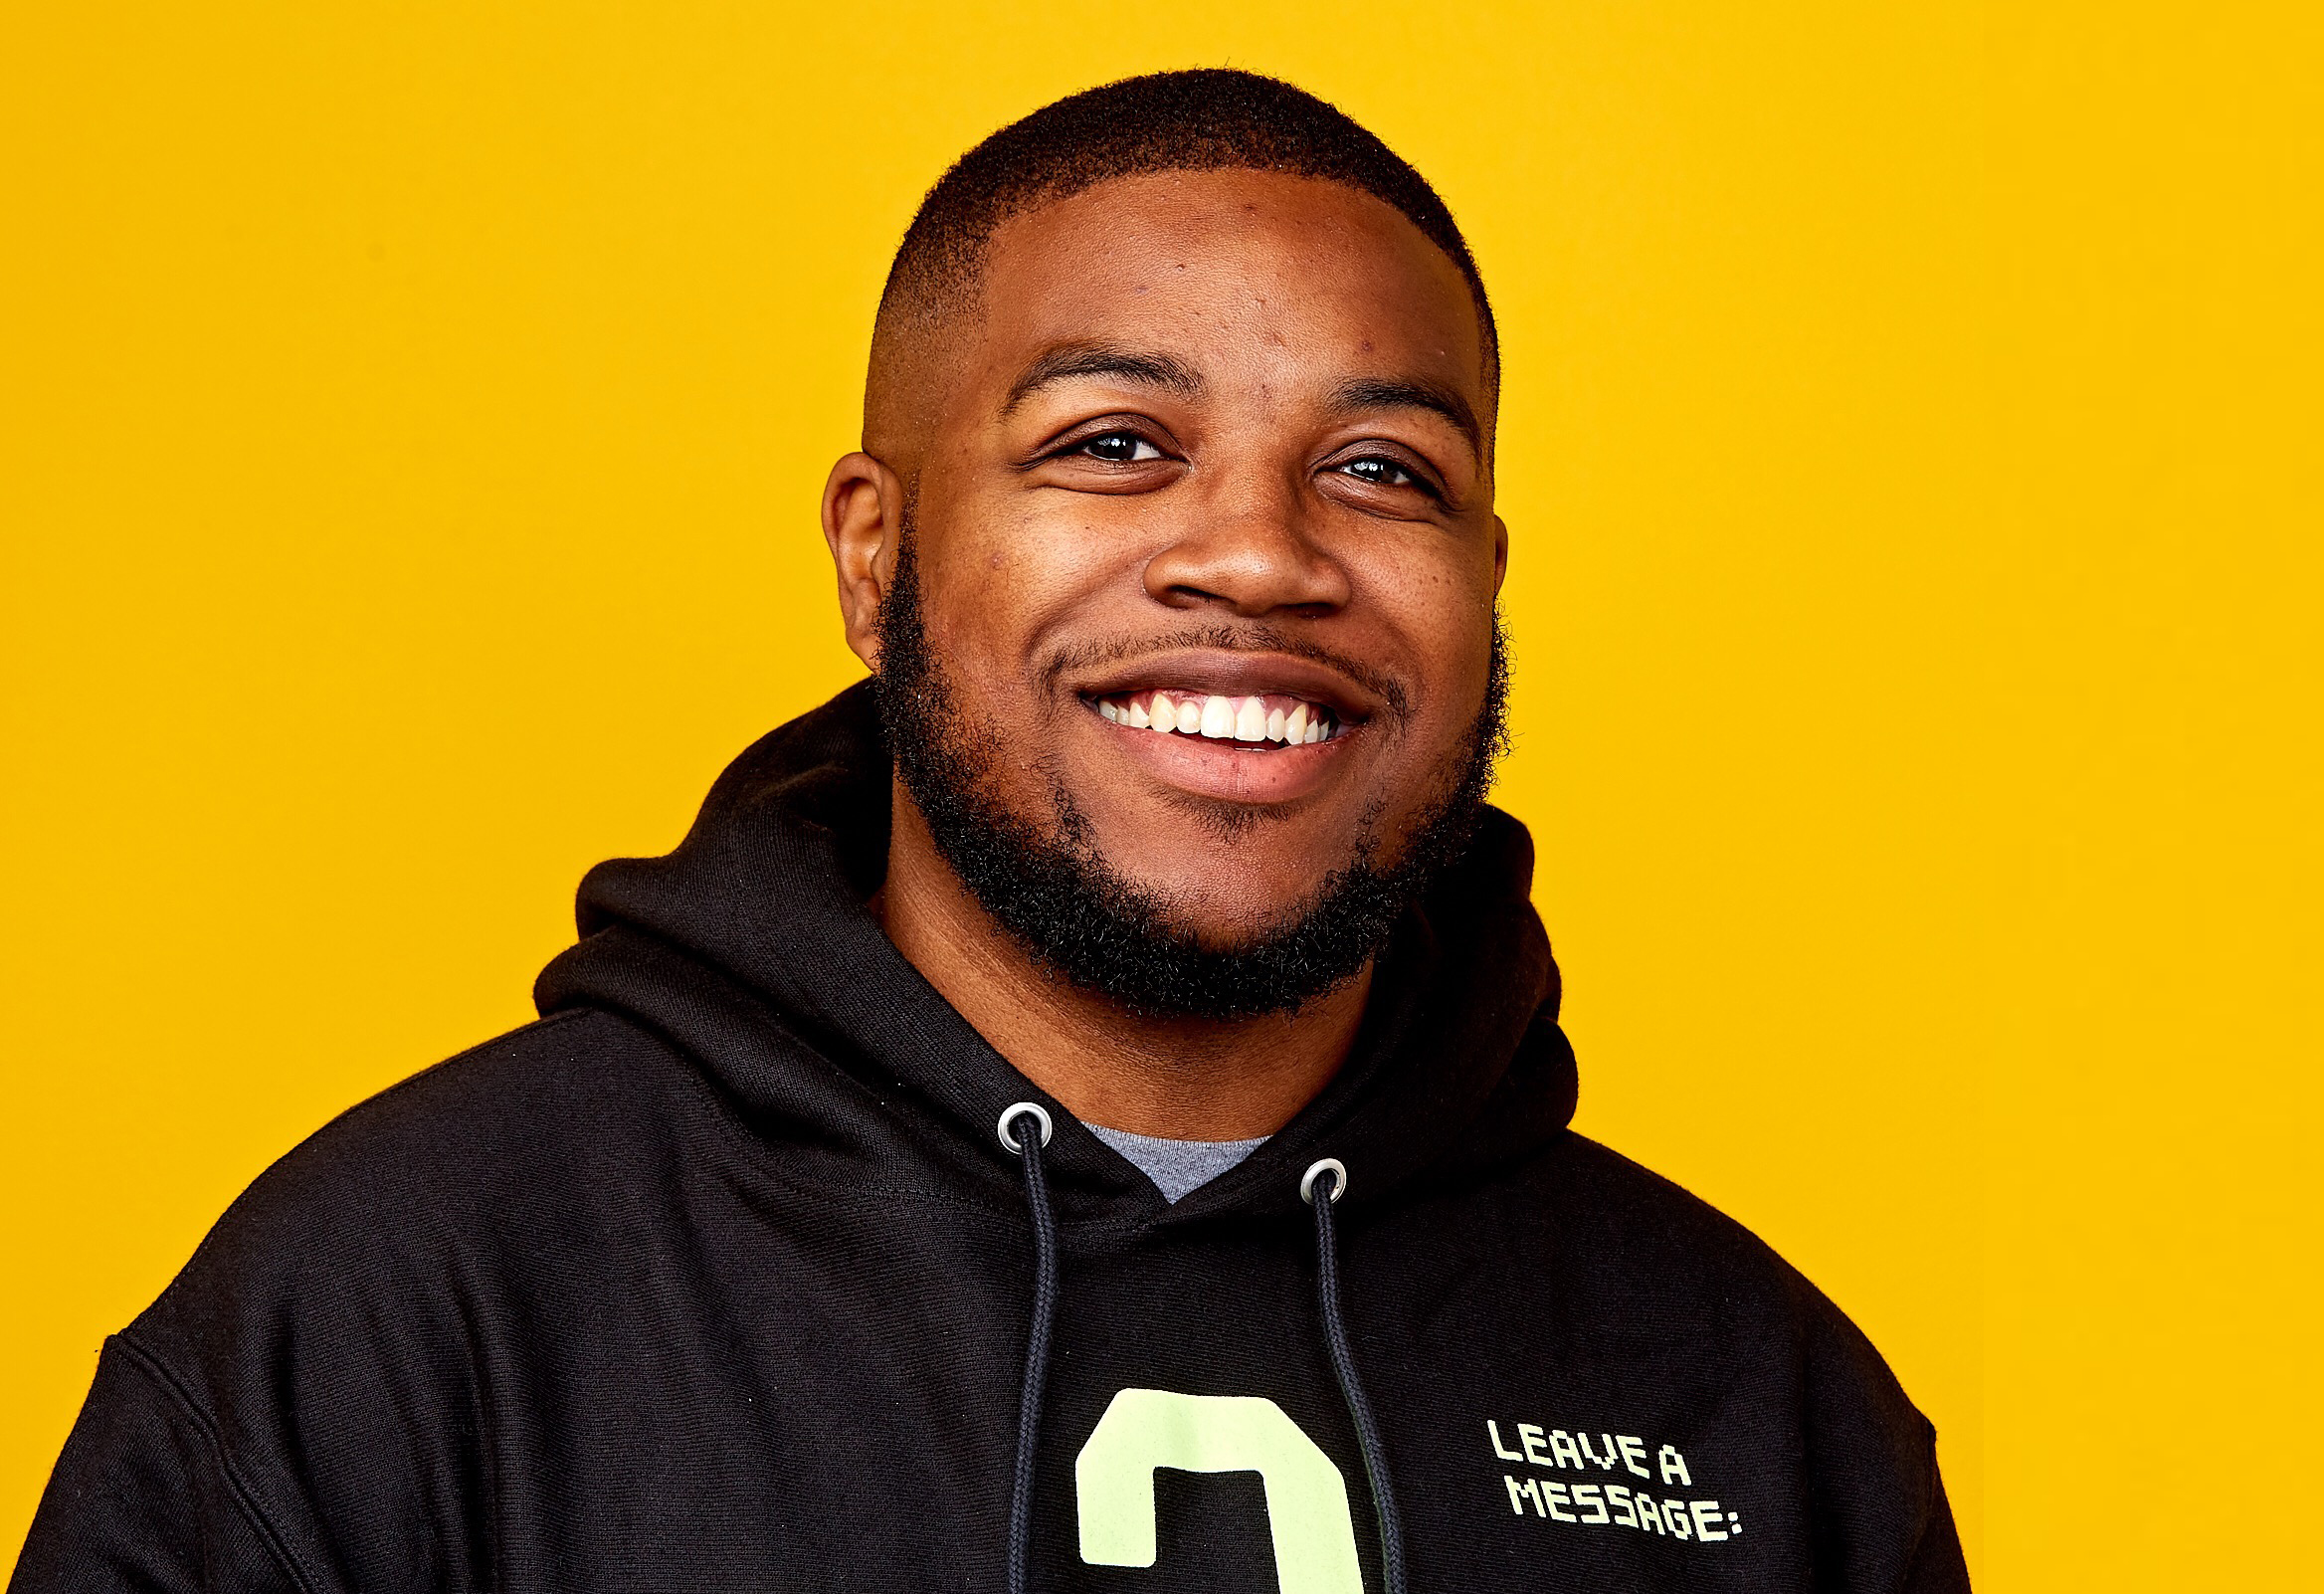 This Software Engineer is Using His Voice to Create Dope Tech for the Culture